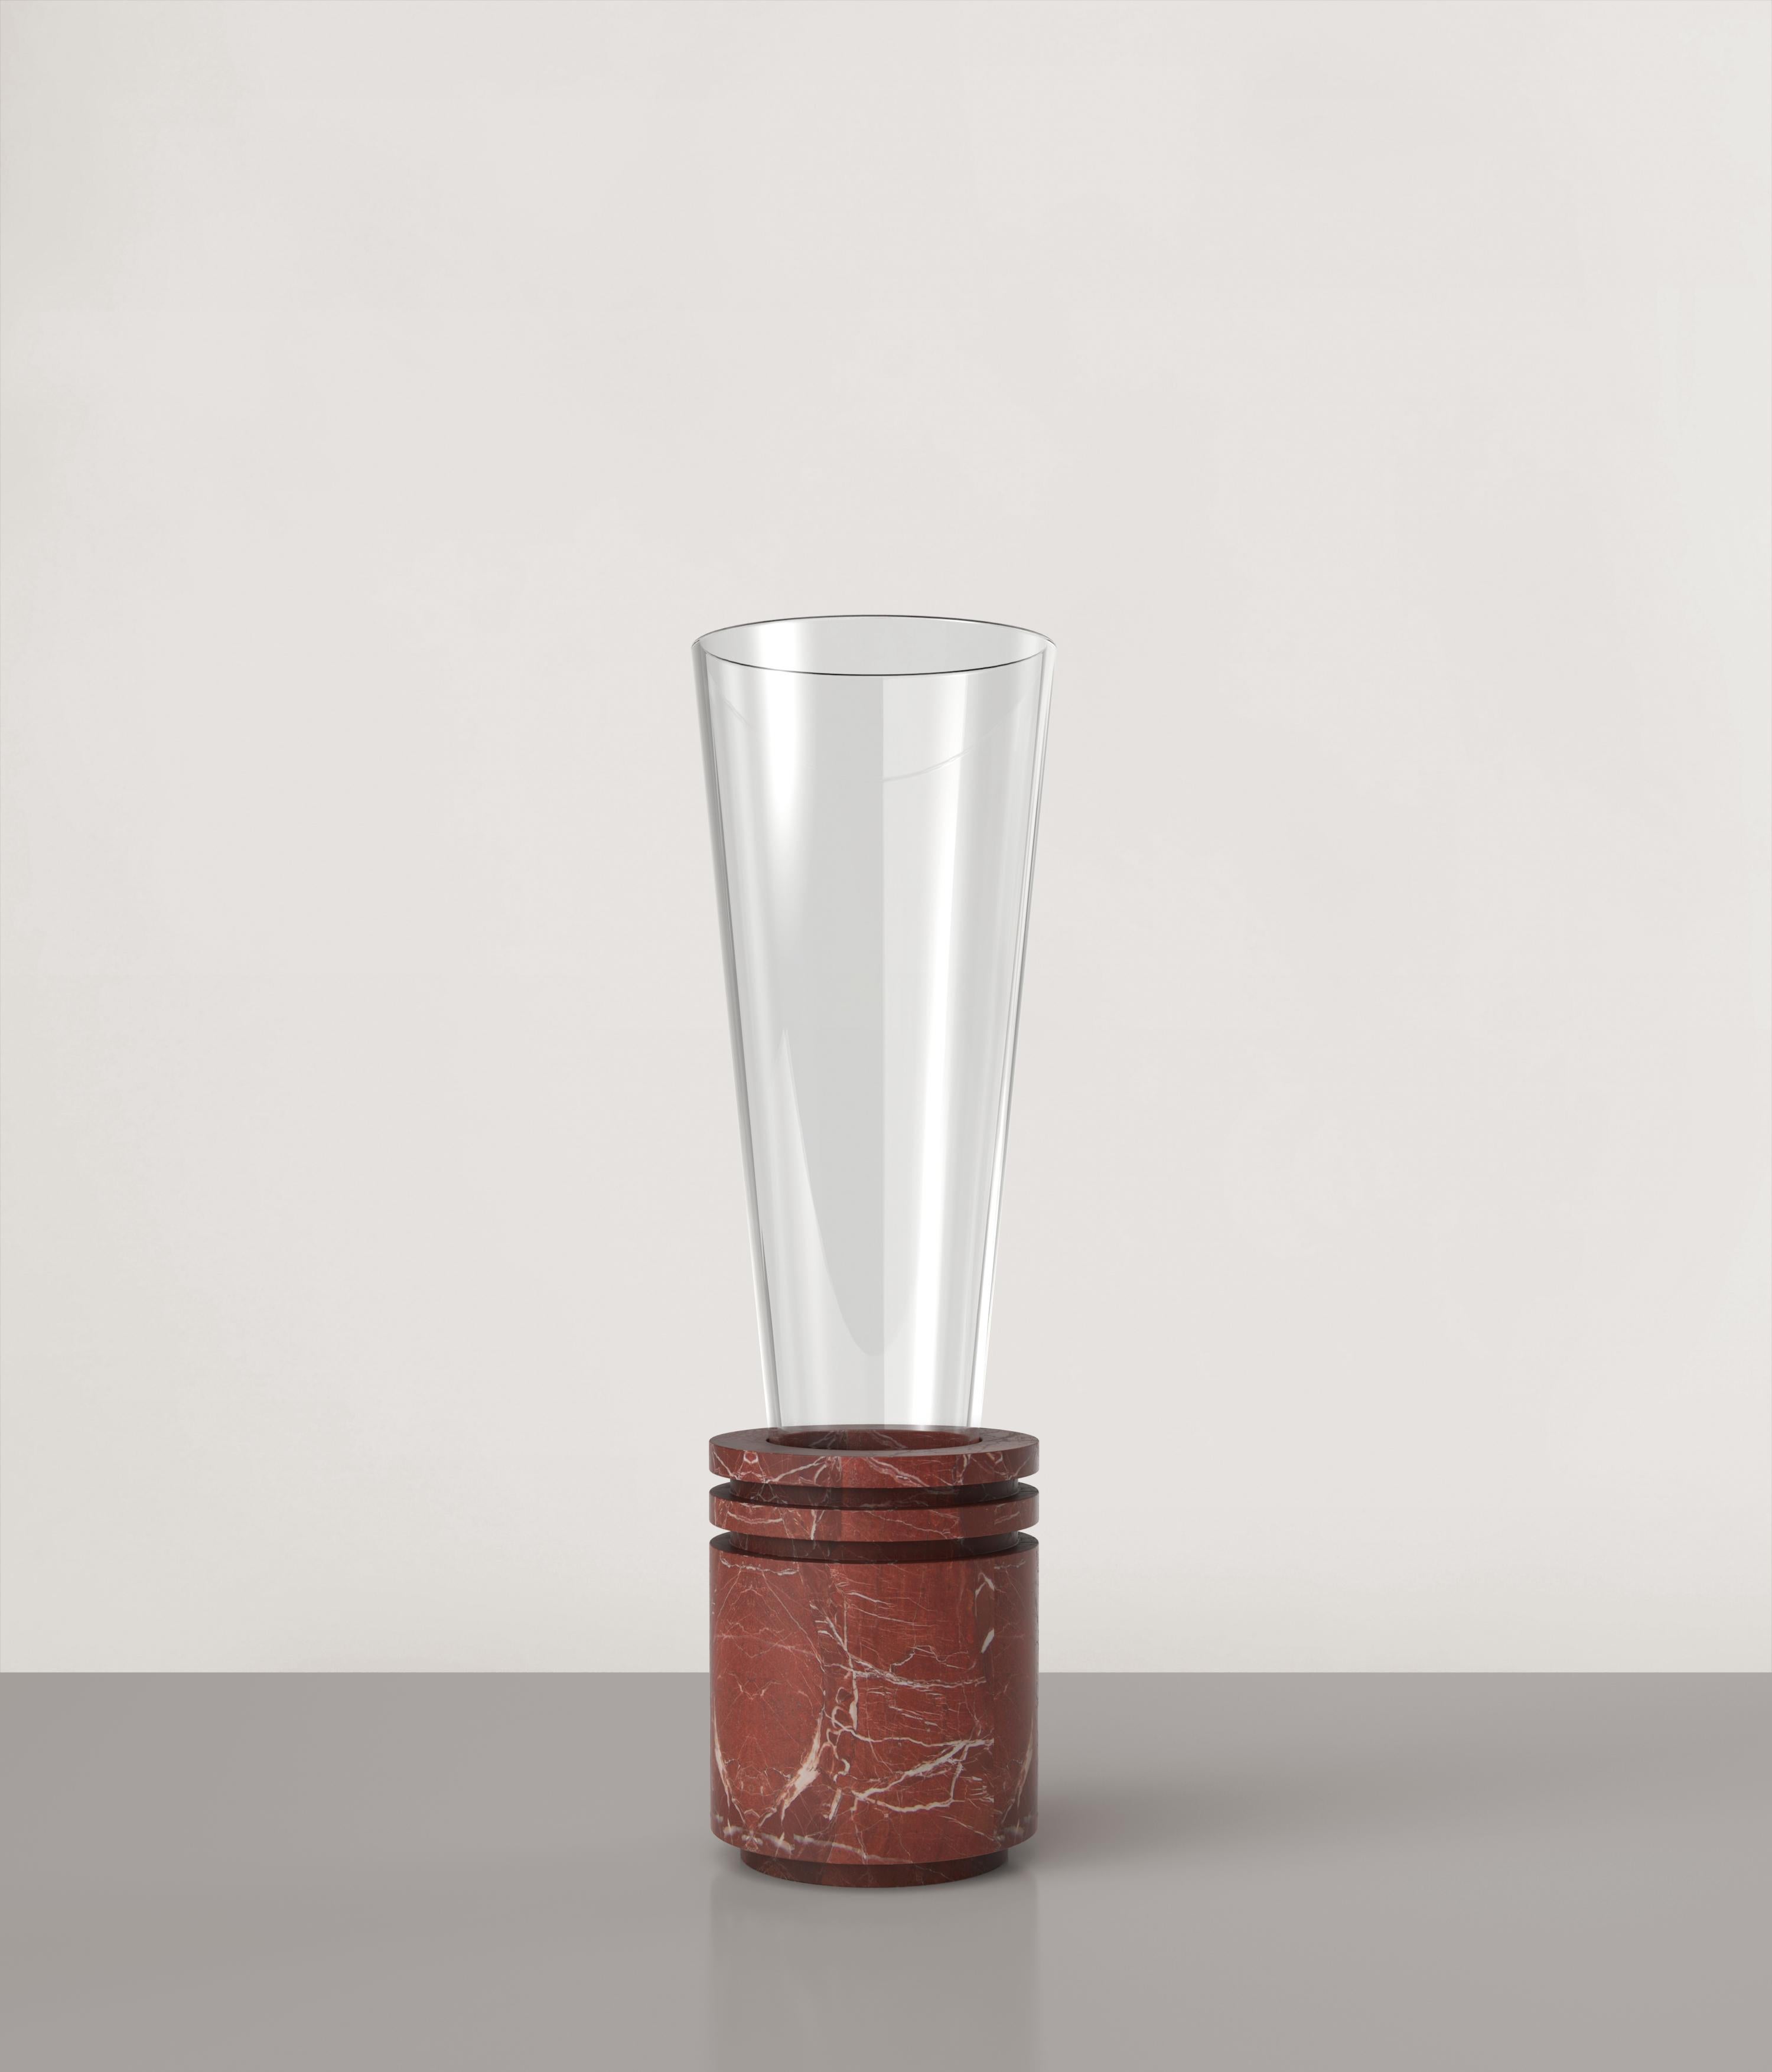 Opera V2 vase by Edizione Limitata
Limited edition of 150 pieces. Signed and numbered.
Dimensions: D12 x H40 cm
Materials: Rosso Balmoral + shiny glass
Also availailable in different colours.

Opera is a 21st Century collection of sculptural